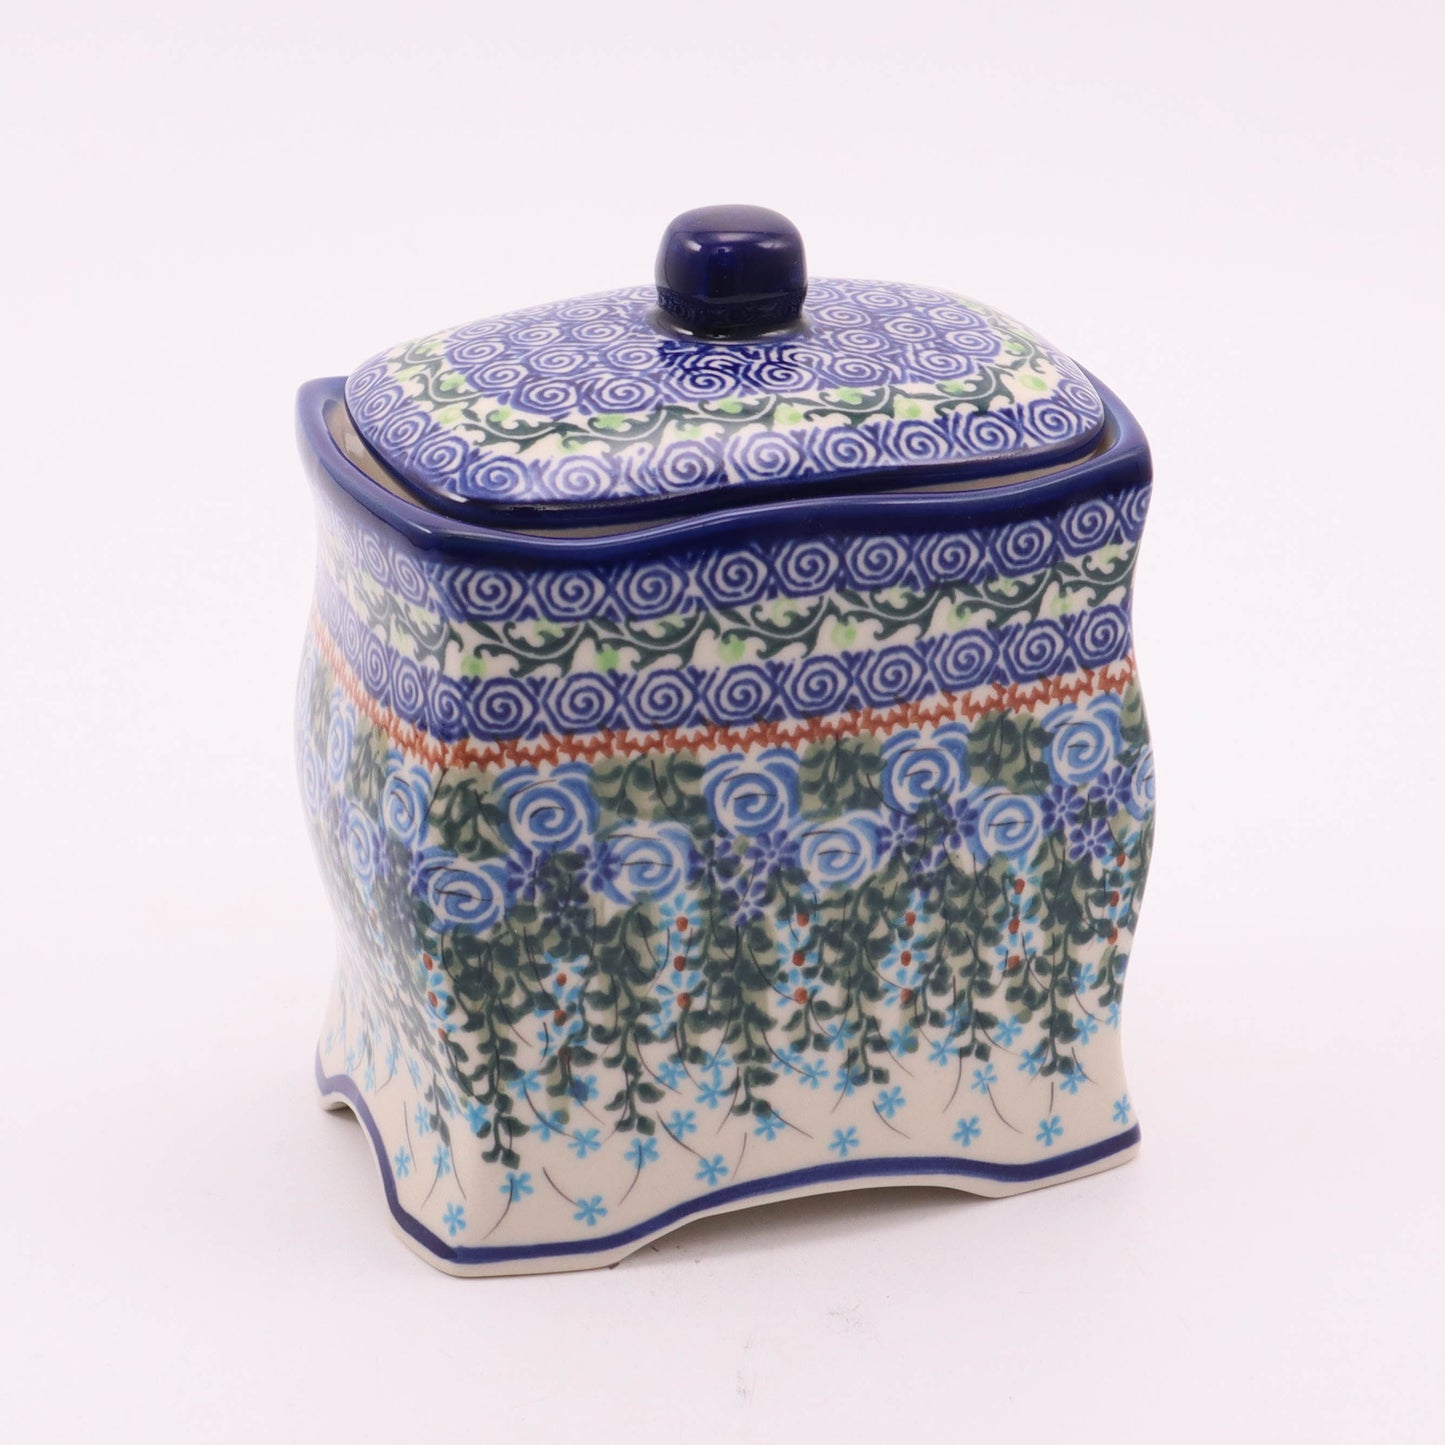 5"x4"x5" Box with Lid. Pattern: Blue Buds